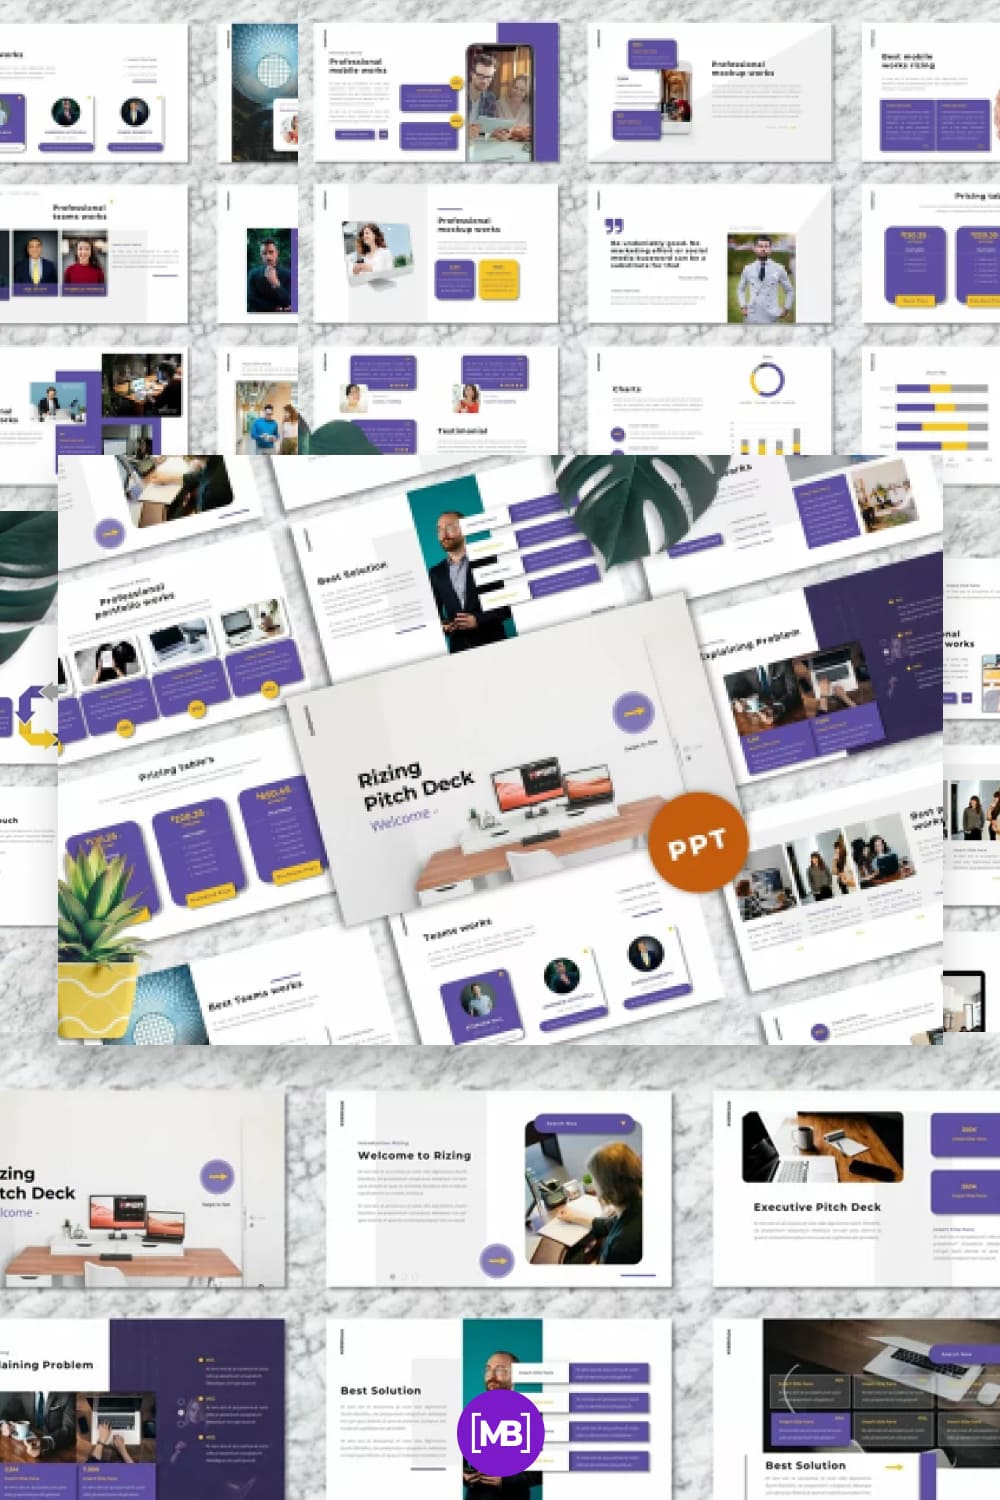 Rizing - pitch deck powerpoint template.